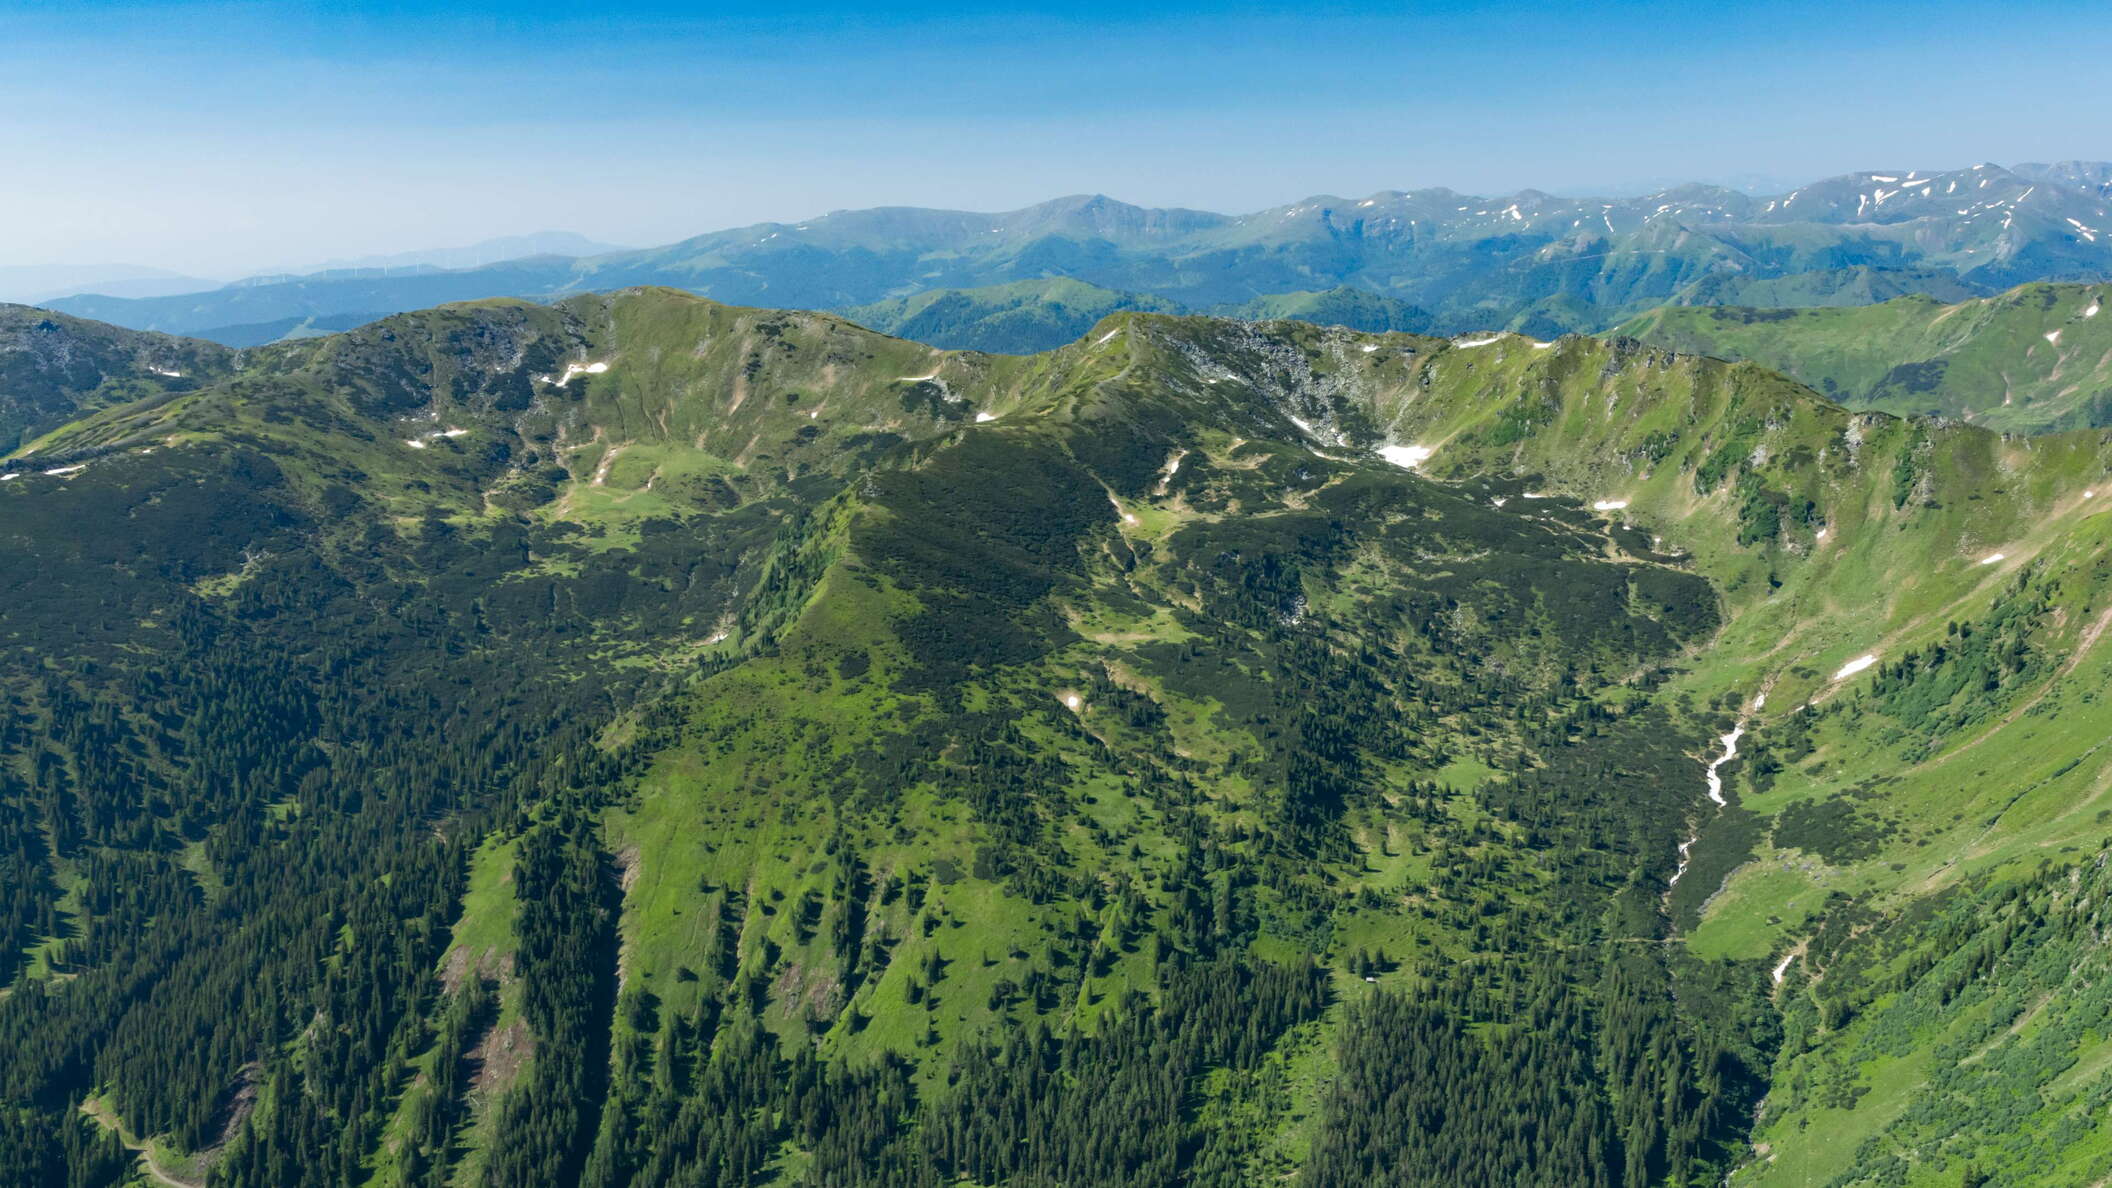 Rottenmann Tauern with glacial cirques and Wölz Tauern